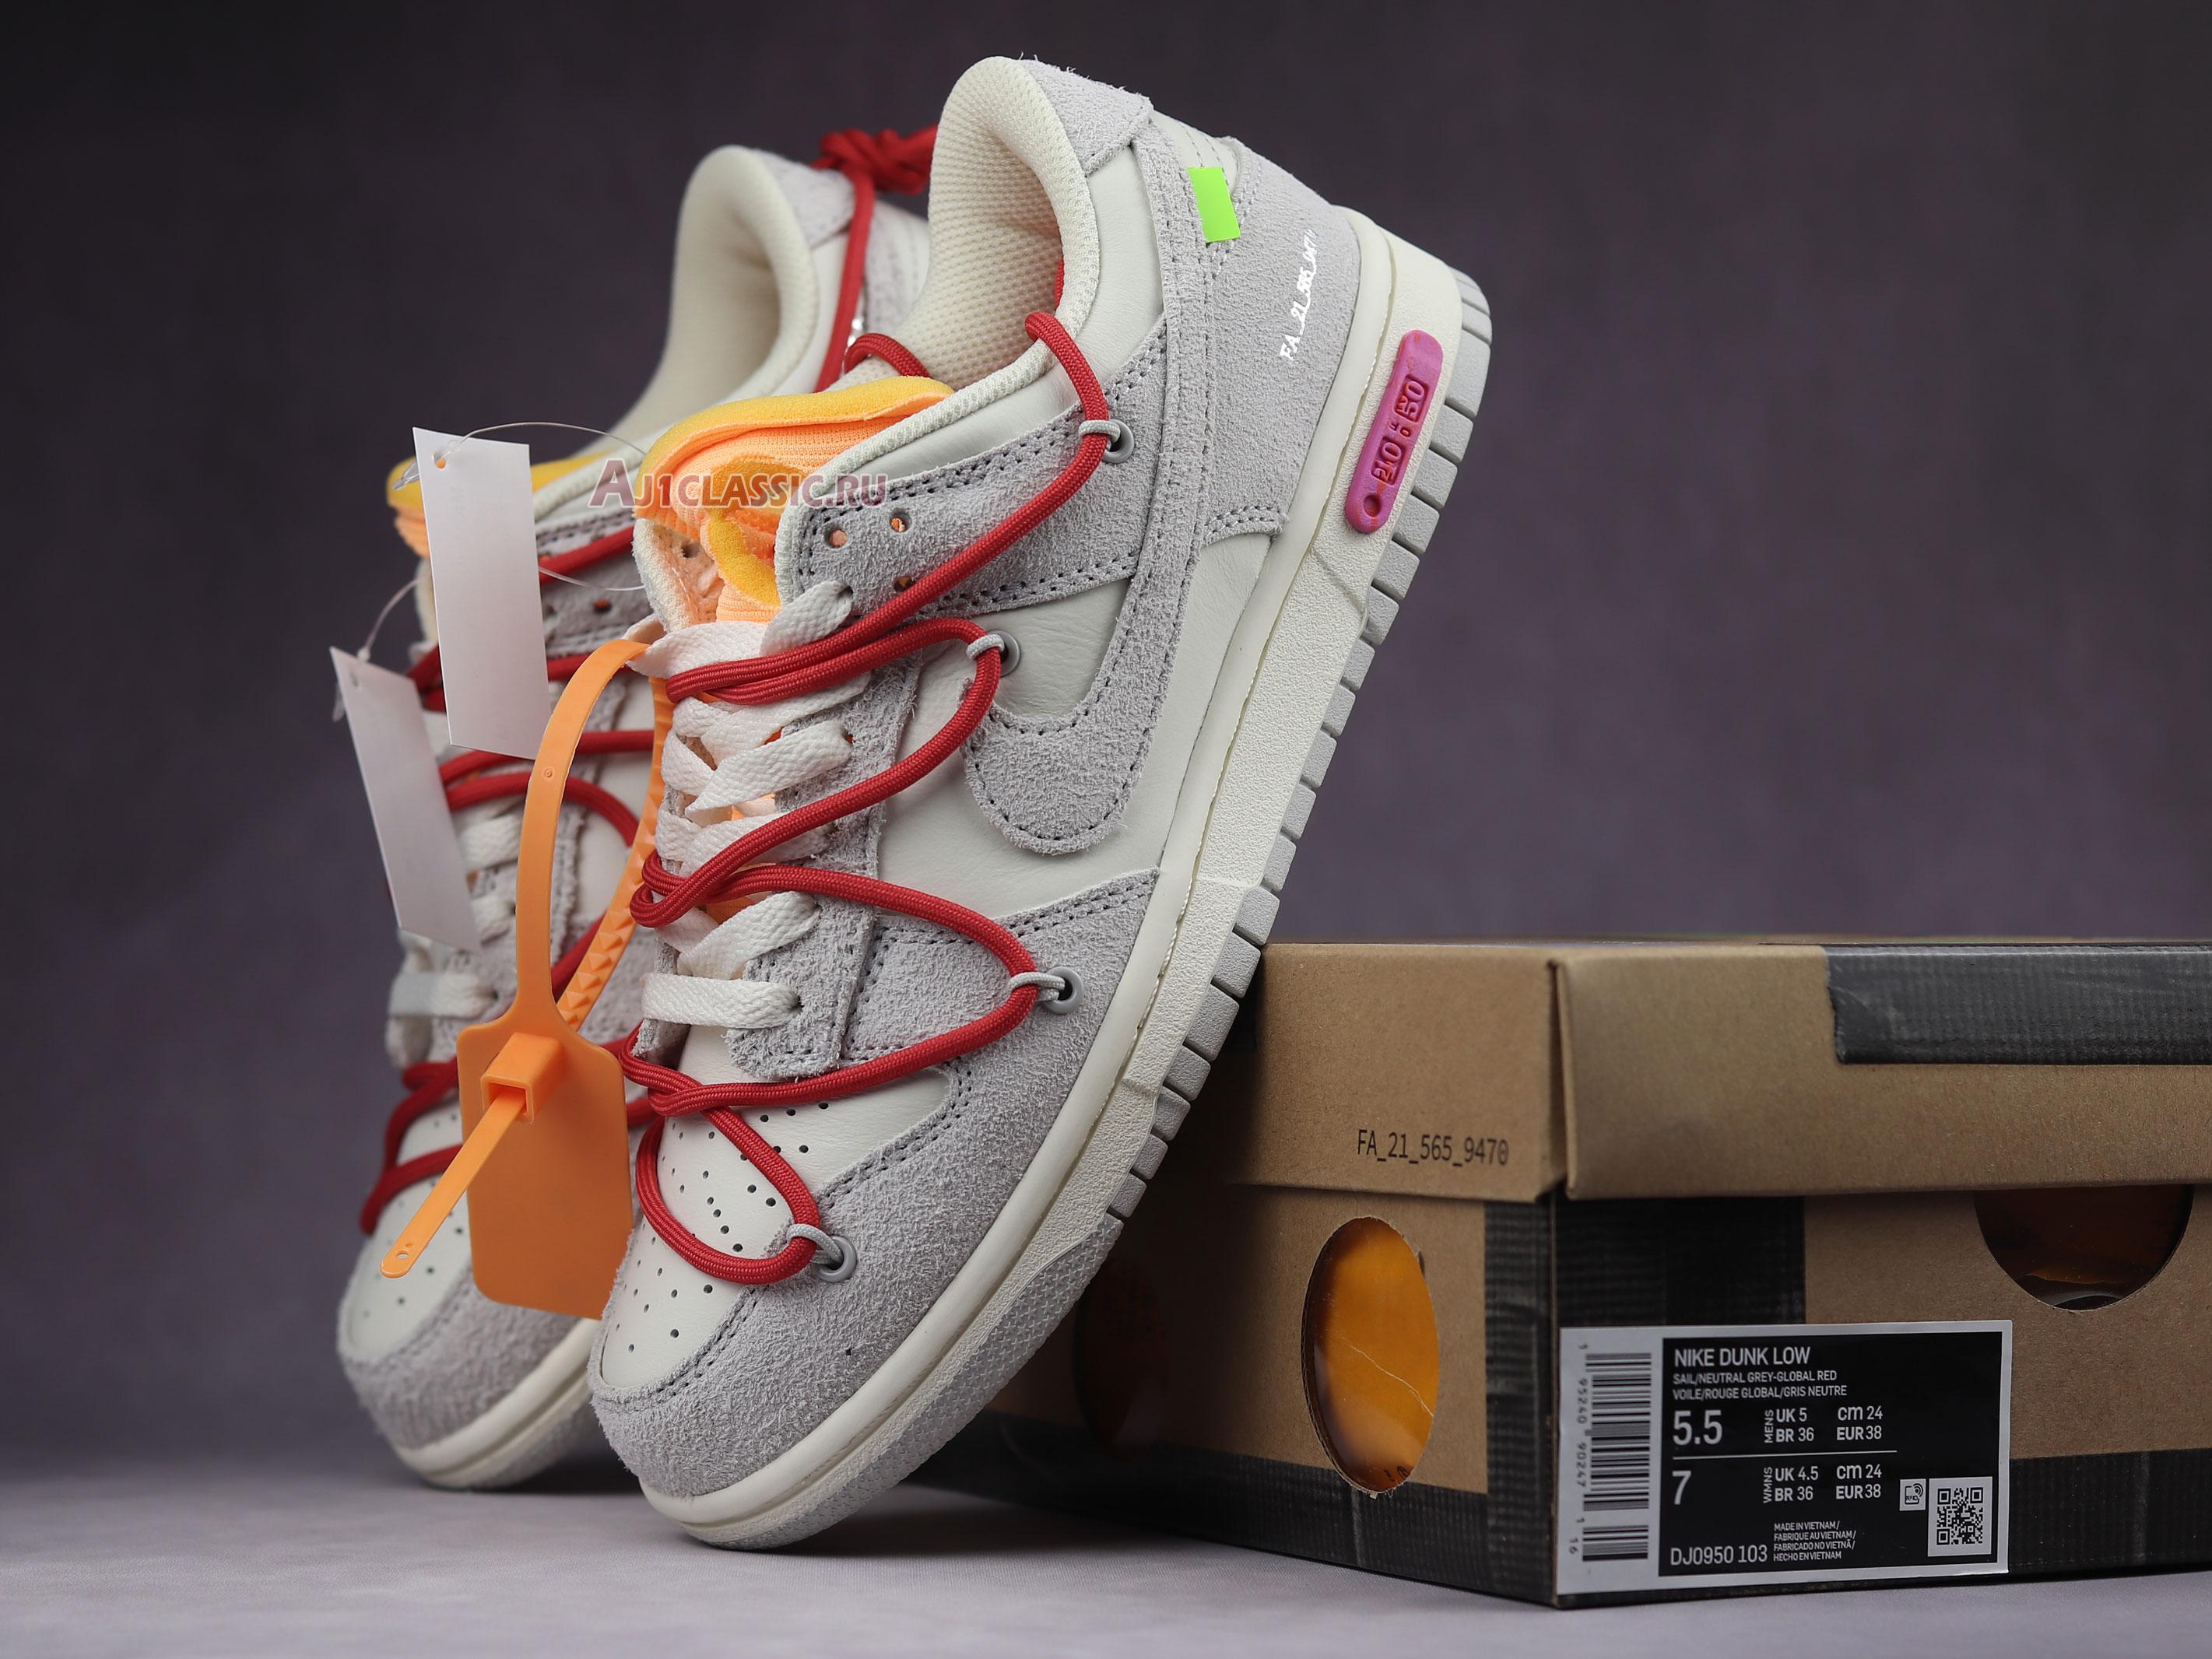 Off-White x Nike Dunk Low Lot 40 of 50 DJ0950-103 Sail/Neutral Grey/Global Red Sneakers